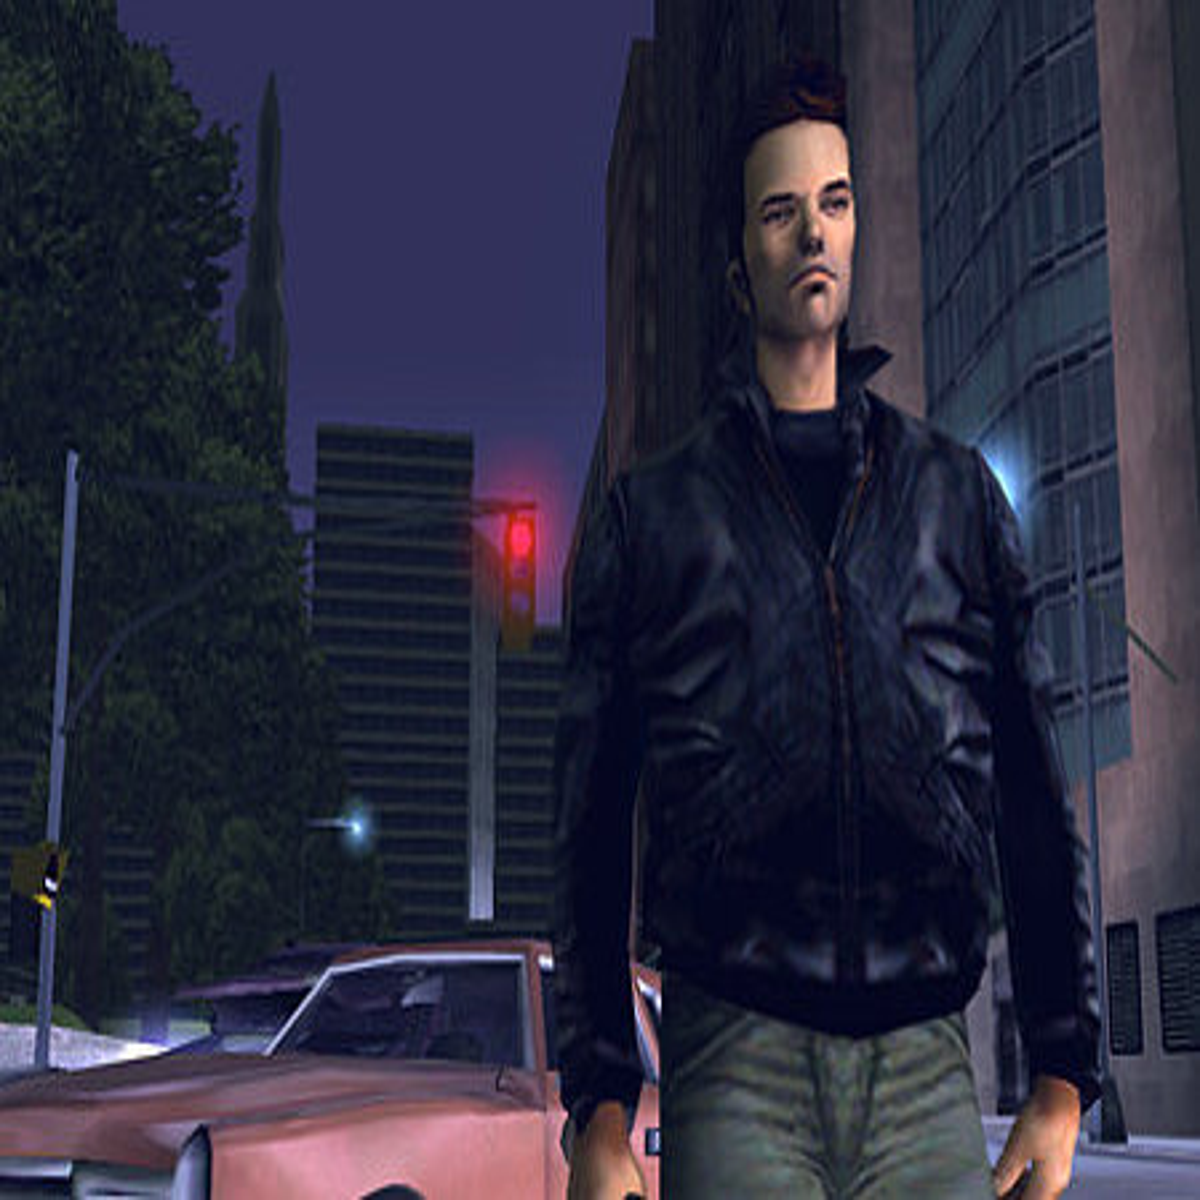 Grand Theft Auto III FIXER PACK (STEAM) at Grand Theft Auto 3